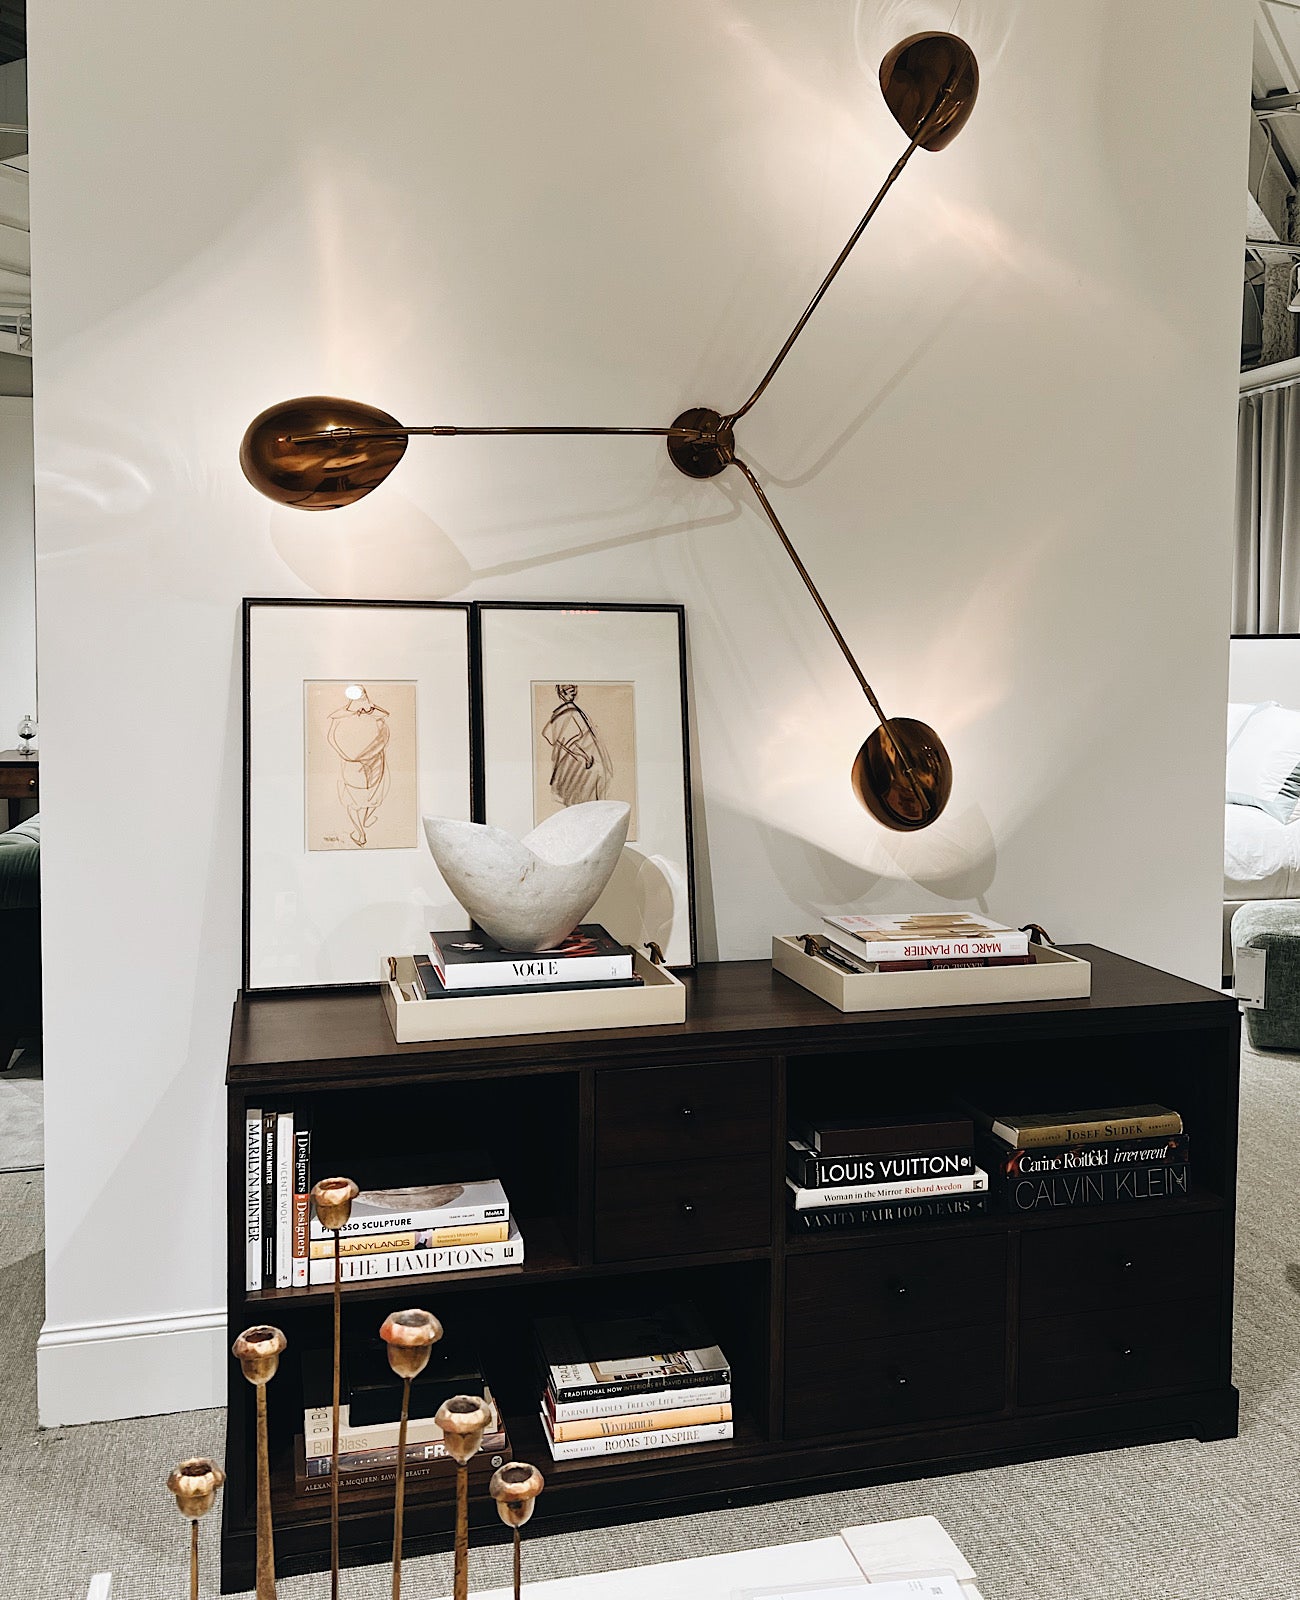 A wall unit display of home decor and coffee table books, above the display are two framed prints and an architectural lightform that has been displayed on the wall as an additional work of art.